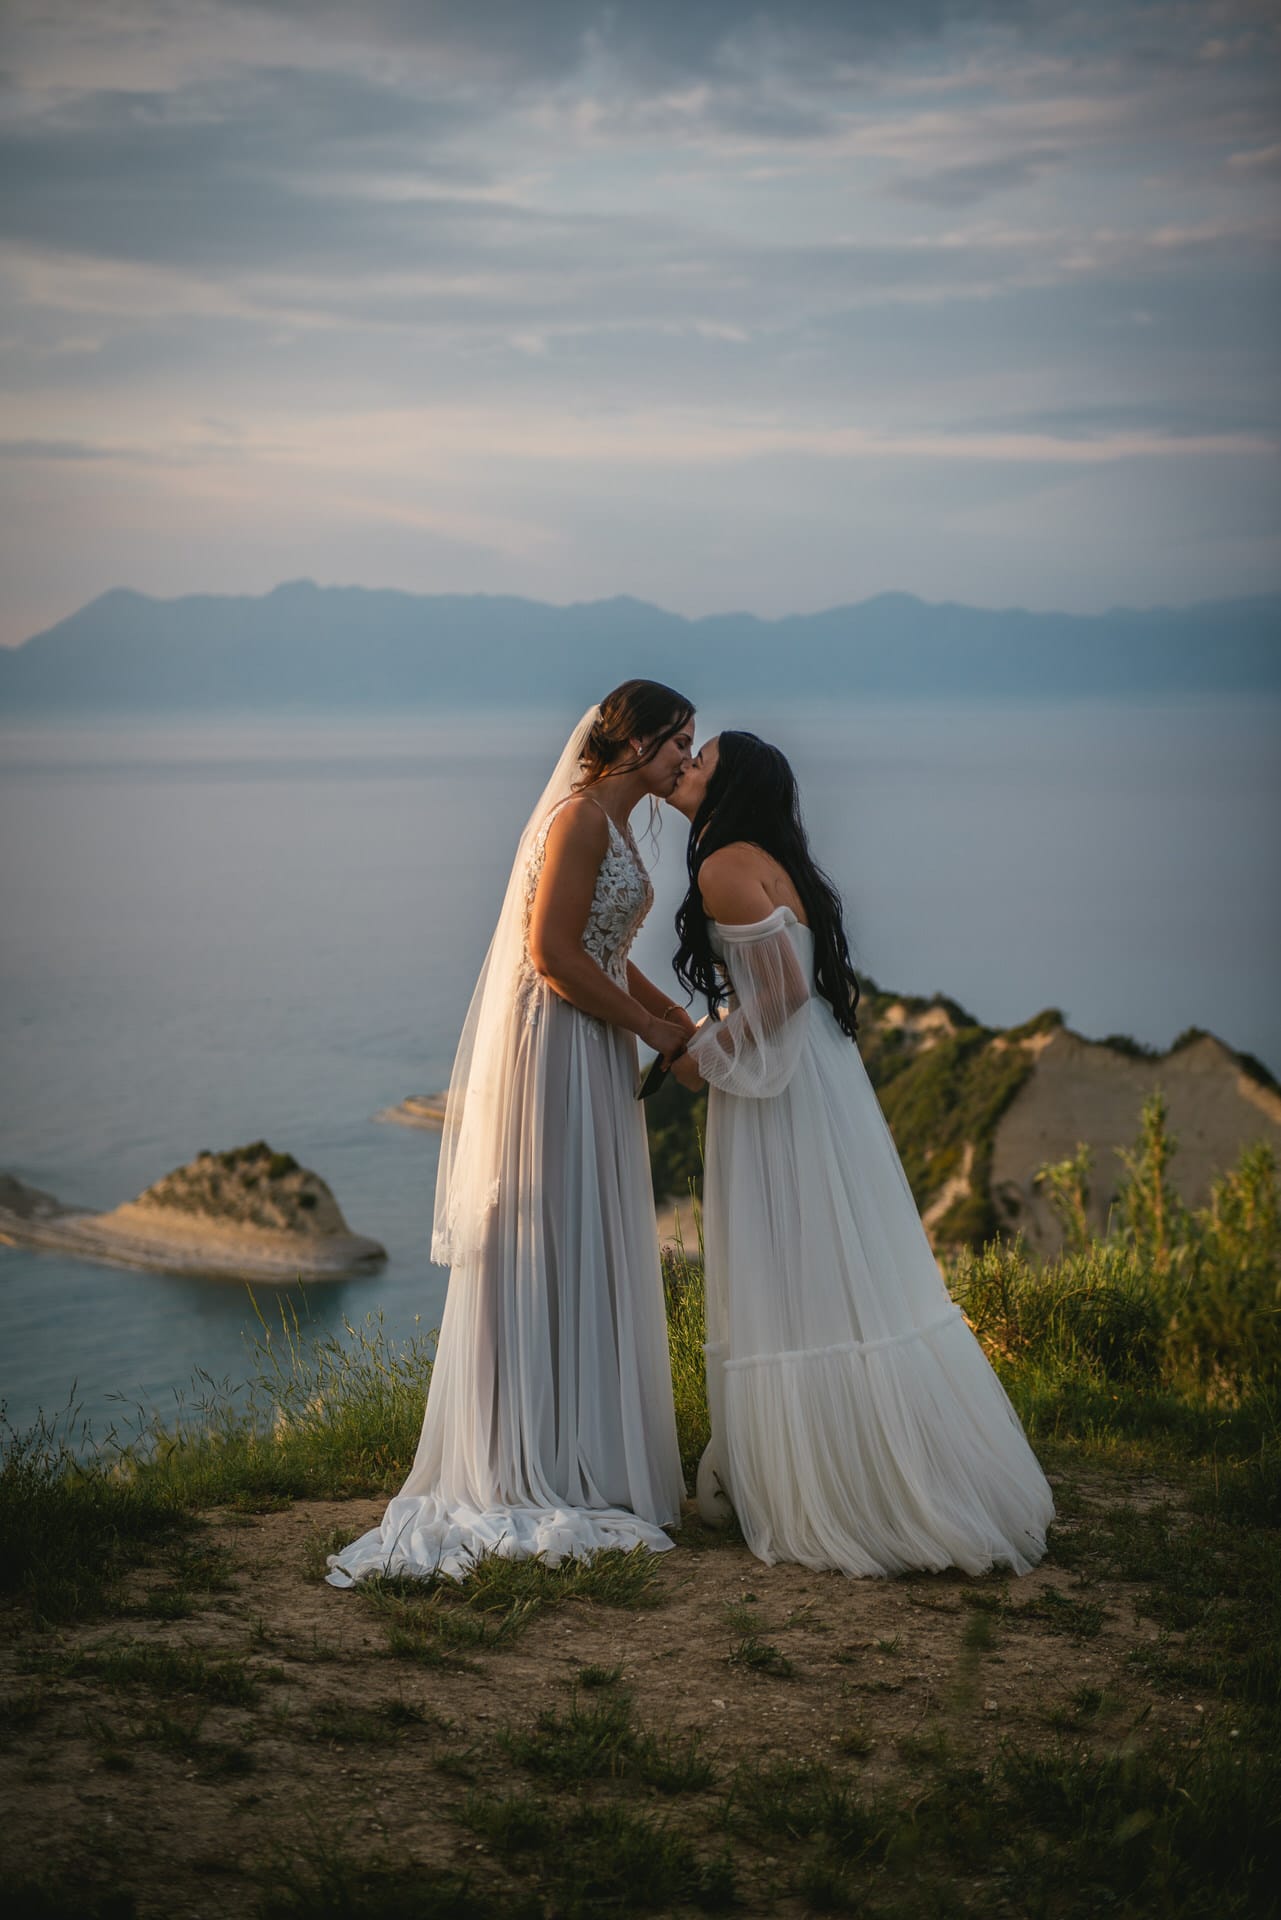 A serene moment of unity during their enchanting Corfu elopement ceremony.